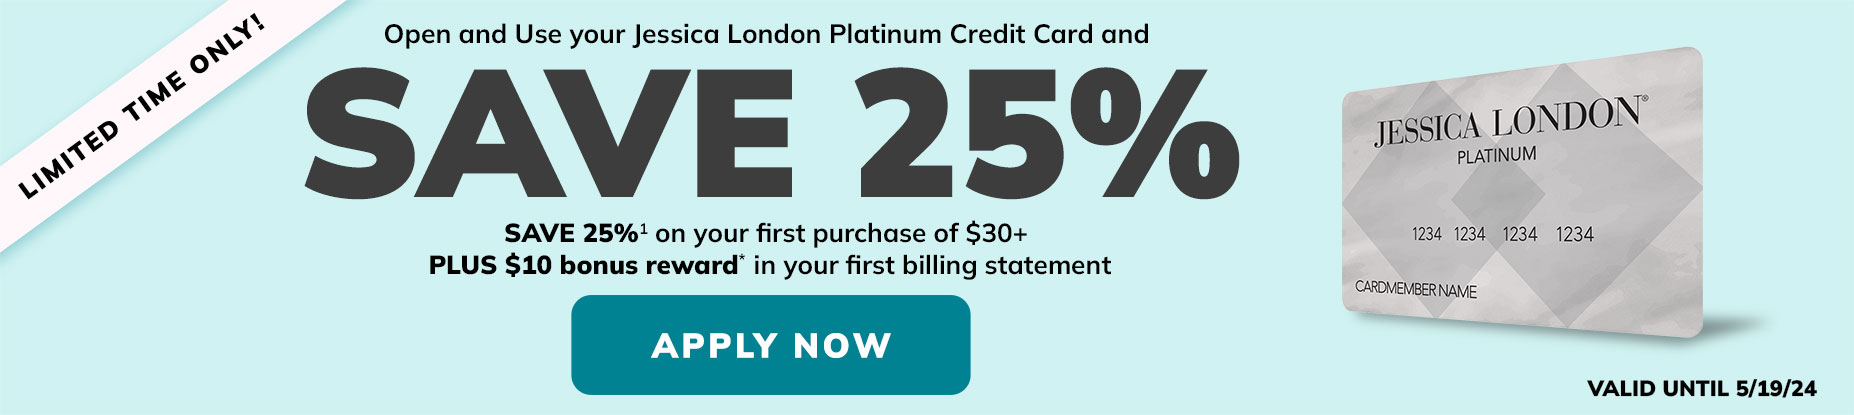 Limited time only! Open and use jessica london platinum credit card and save 25% on your first purchase of $30+ plus $10 bonus reward in your first billing statement apply now.